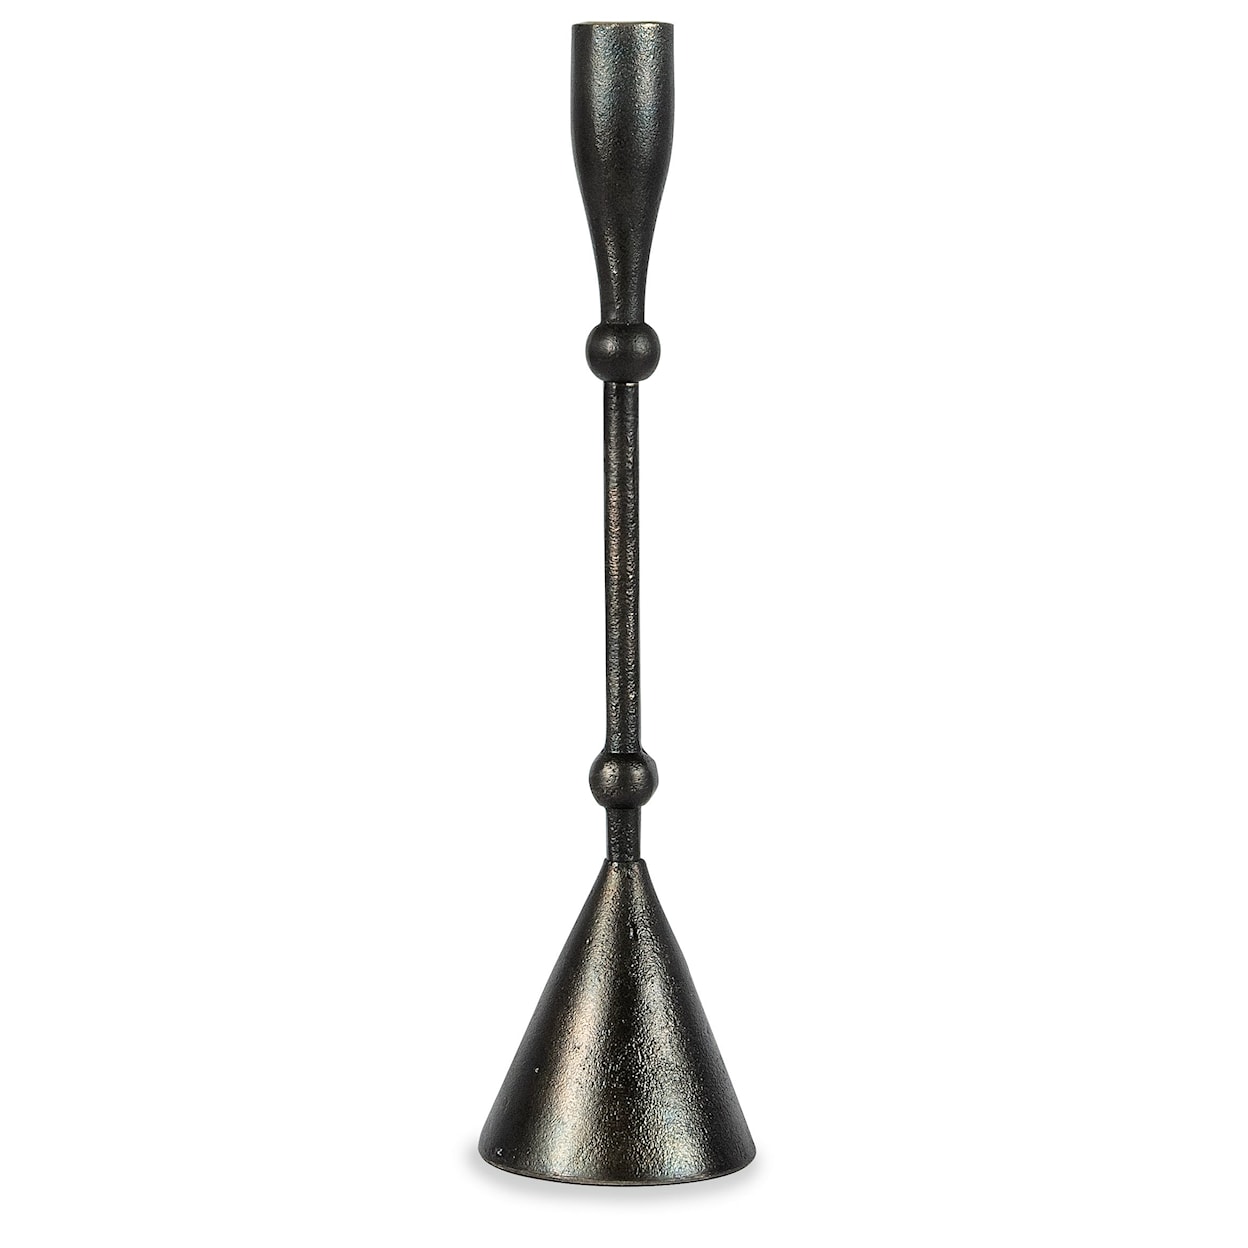 BOBO Intriguing Objects Accessory Antique Black Candleholder - Small